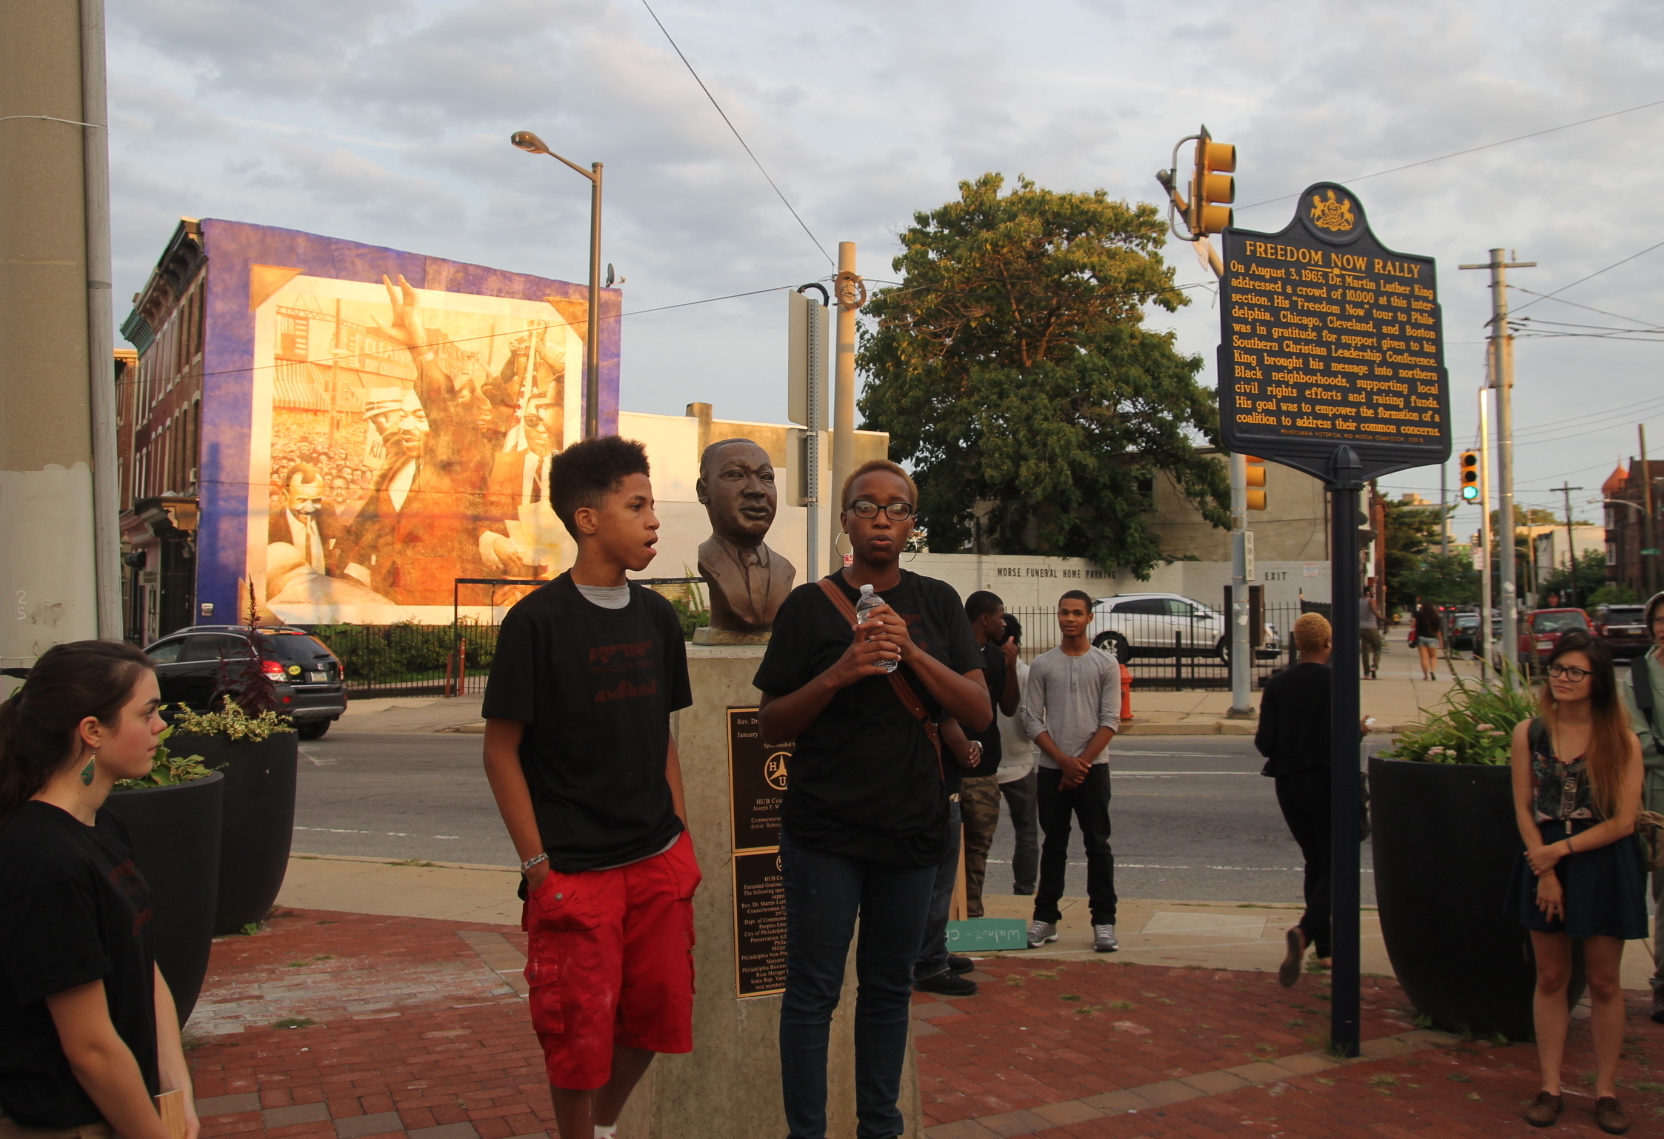 Mixplace Studio students spoke at the historic spot Dr. Martin Luther King, Jr. led the Freedom Now Rally